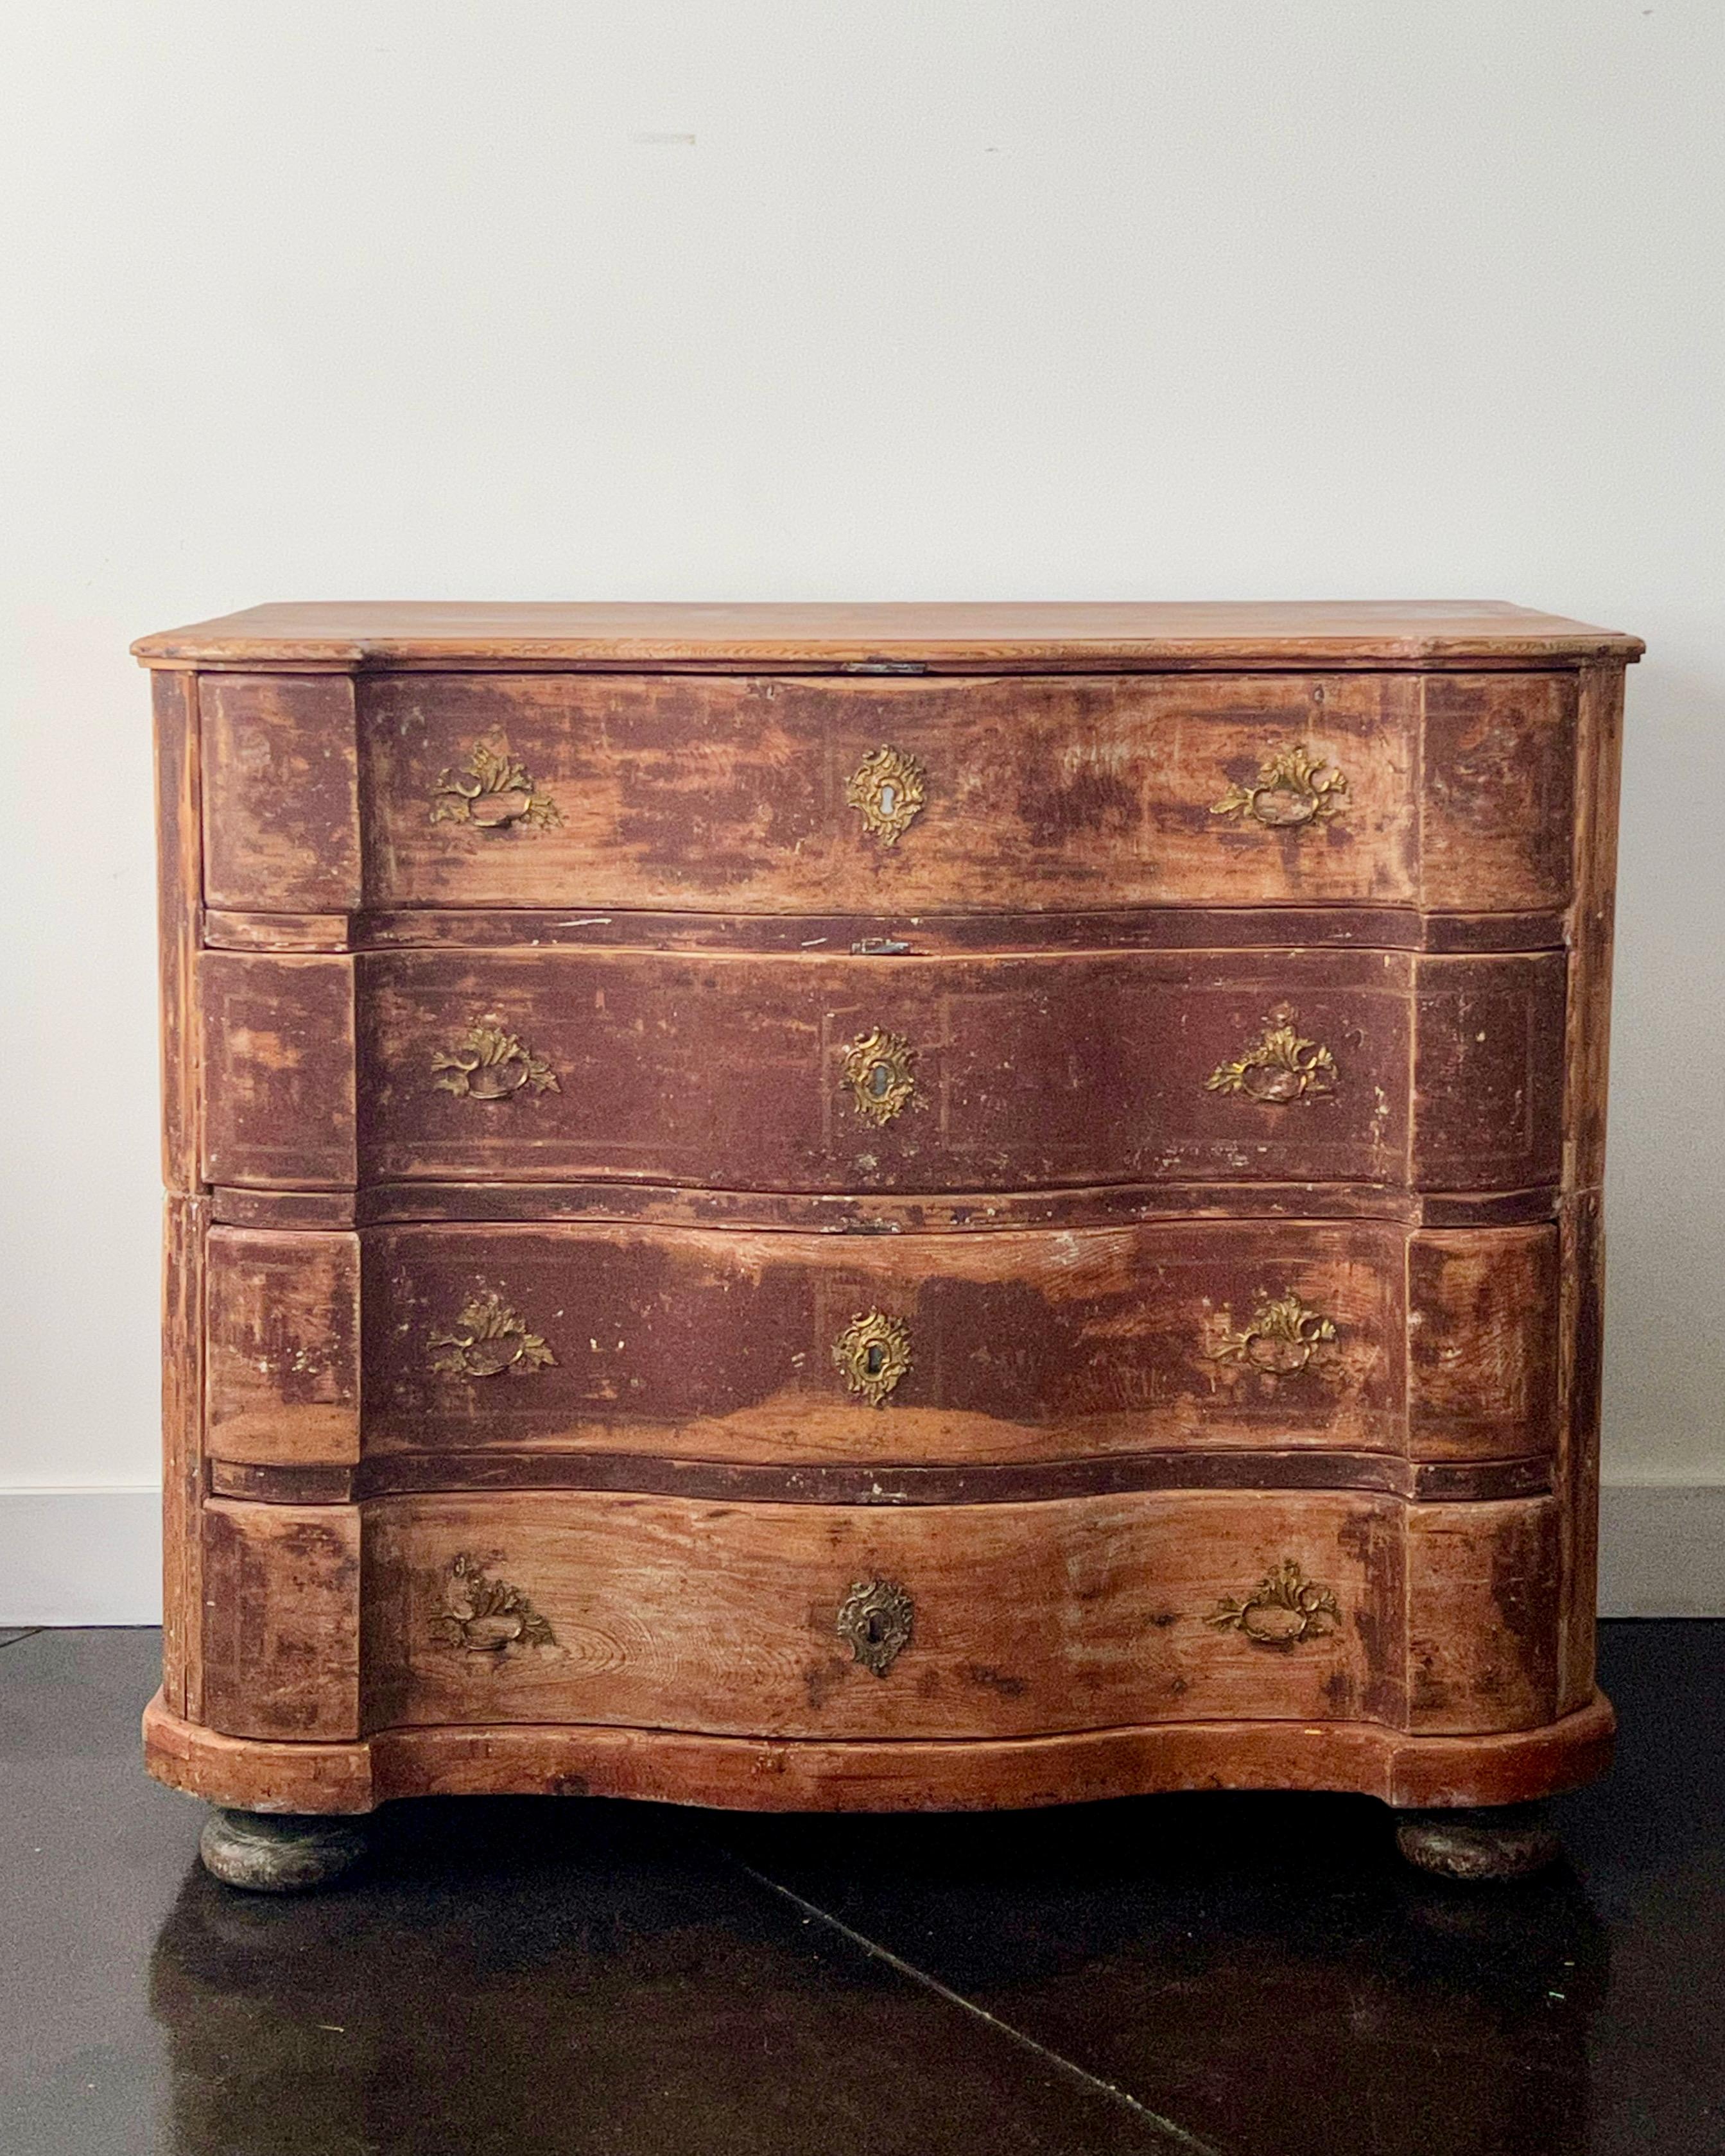 An exceptional 18th century Swedish chest in original time worn paint with beautifully carved serpentine drawer fronts with original handsome bronze hardwares and shaped top. The chest is in two parts with original large handsome handles for convent